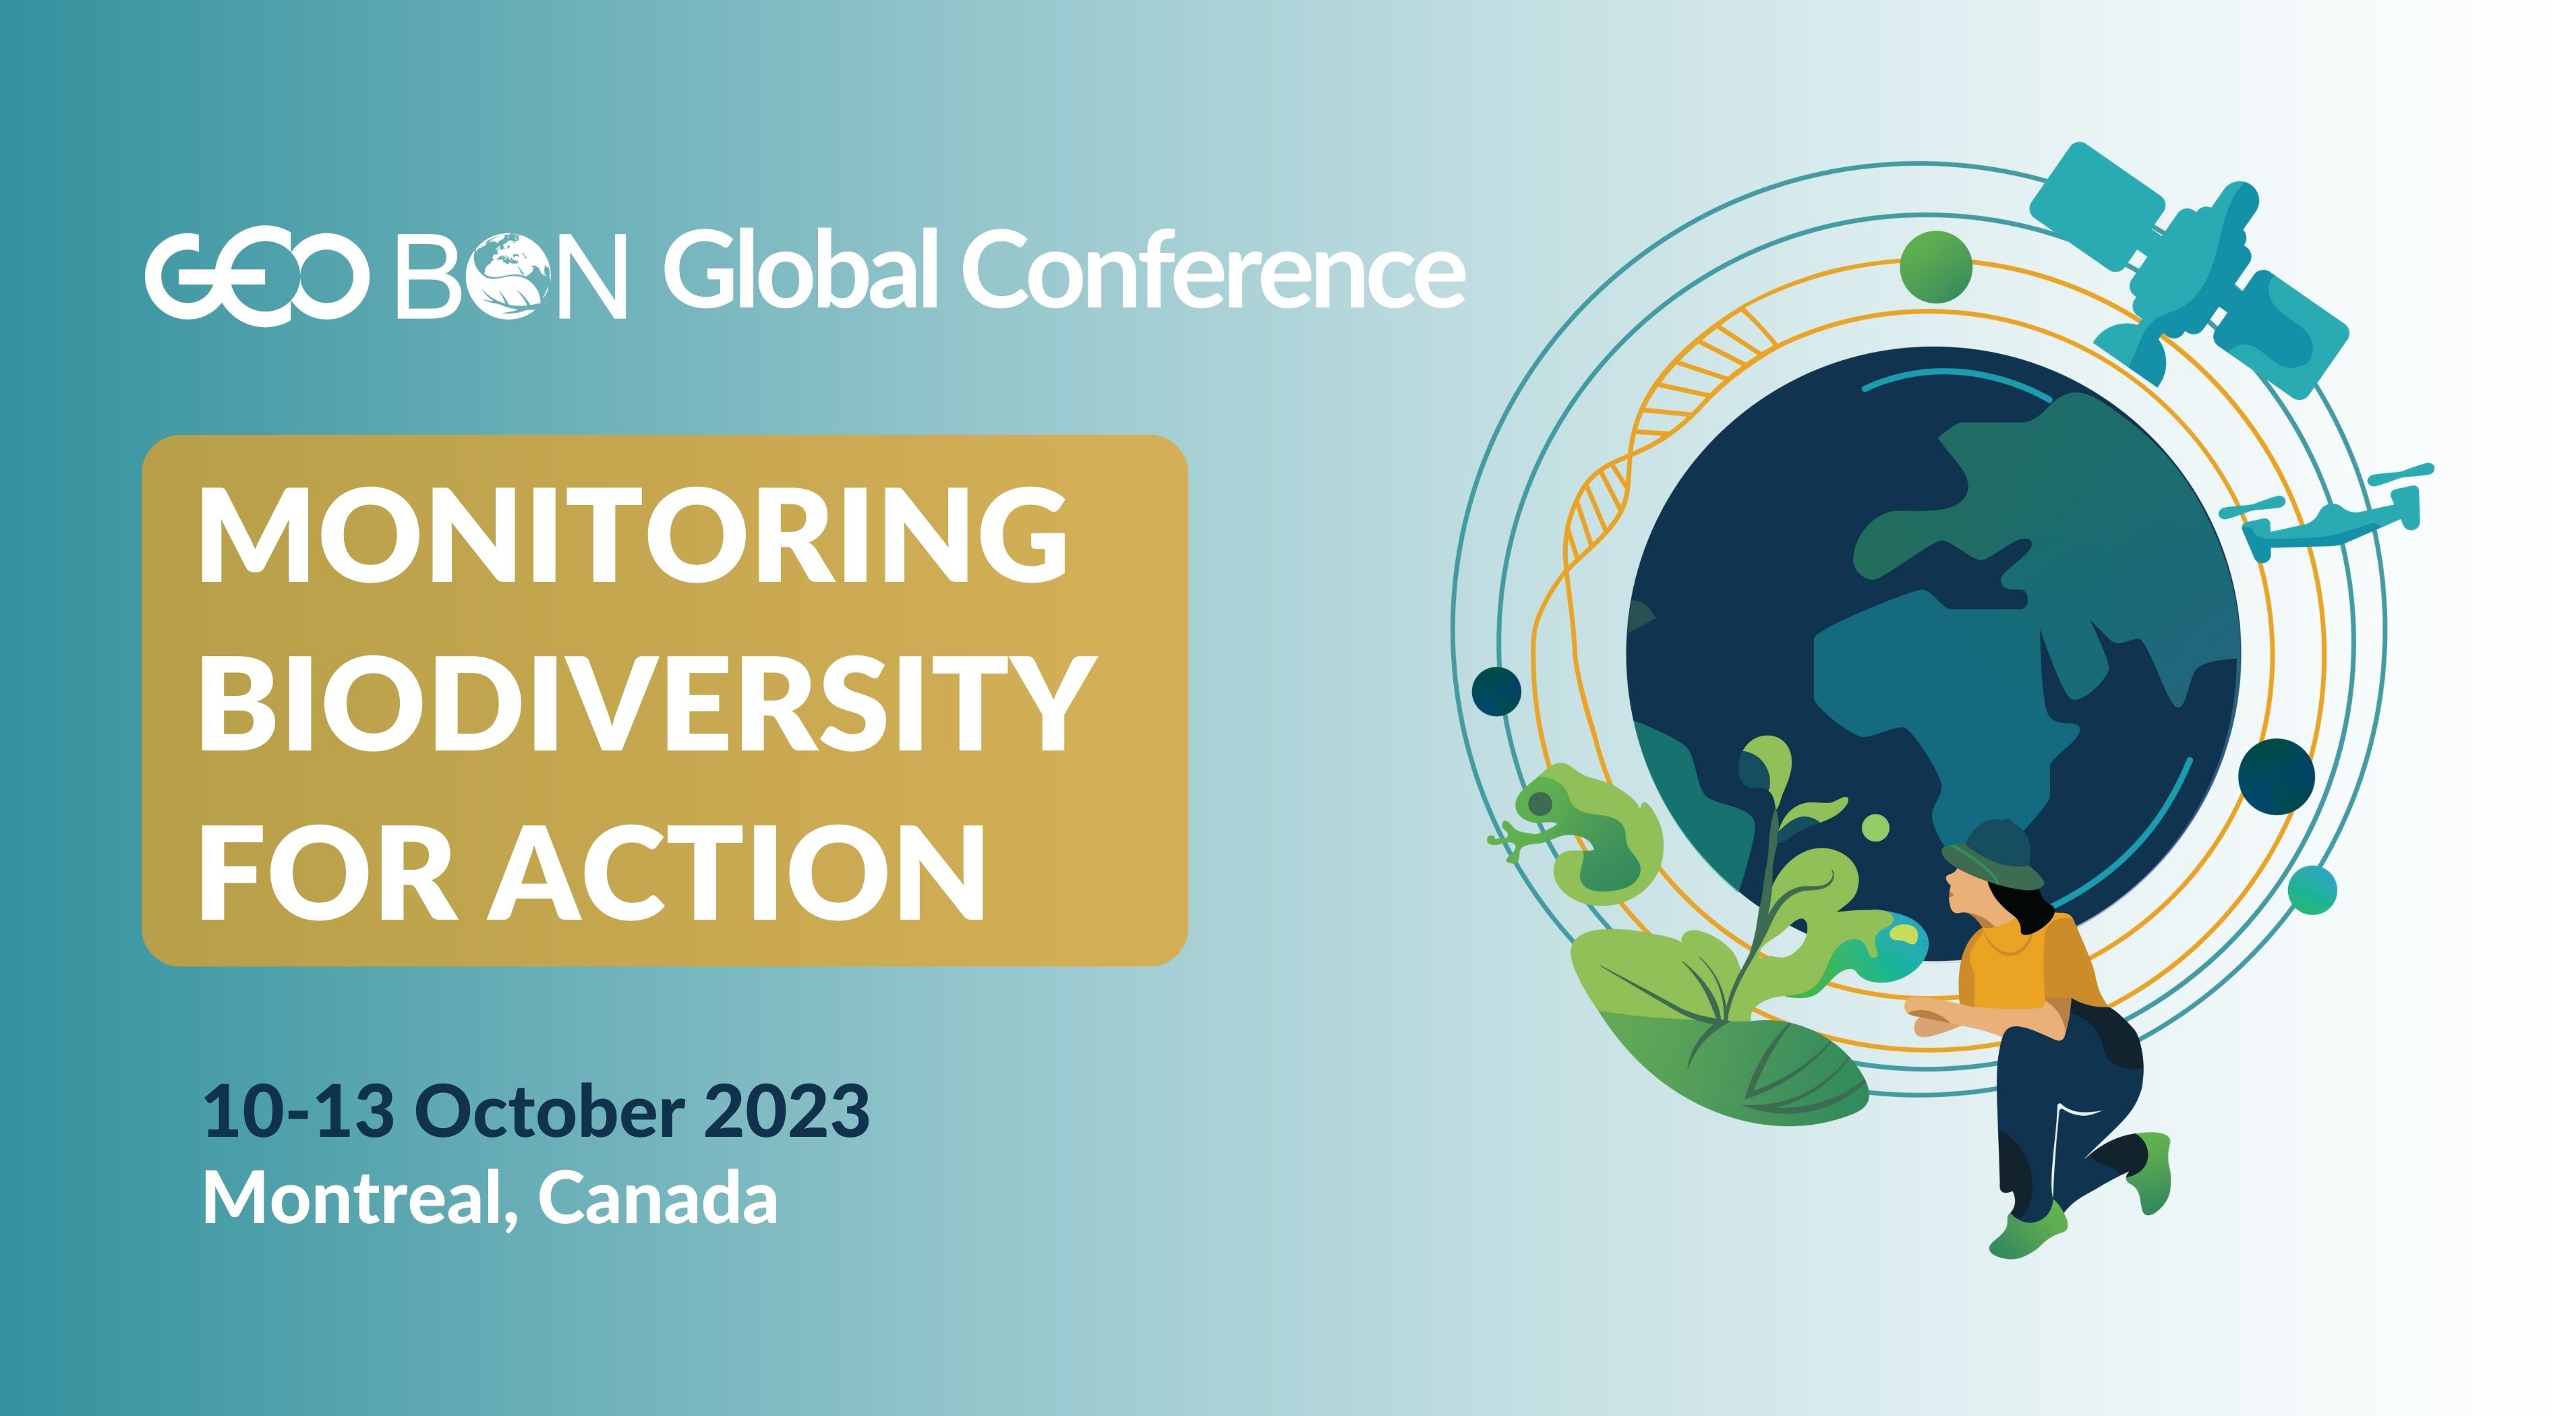 GEO BON Gobal Conference, Monitoring Biodiversity for Action. 10 to 13 October 2023. Montreal, Canada